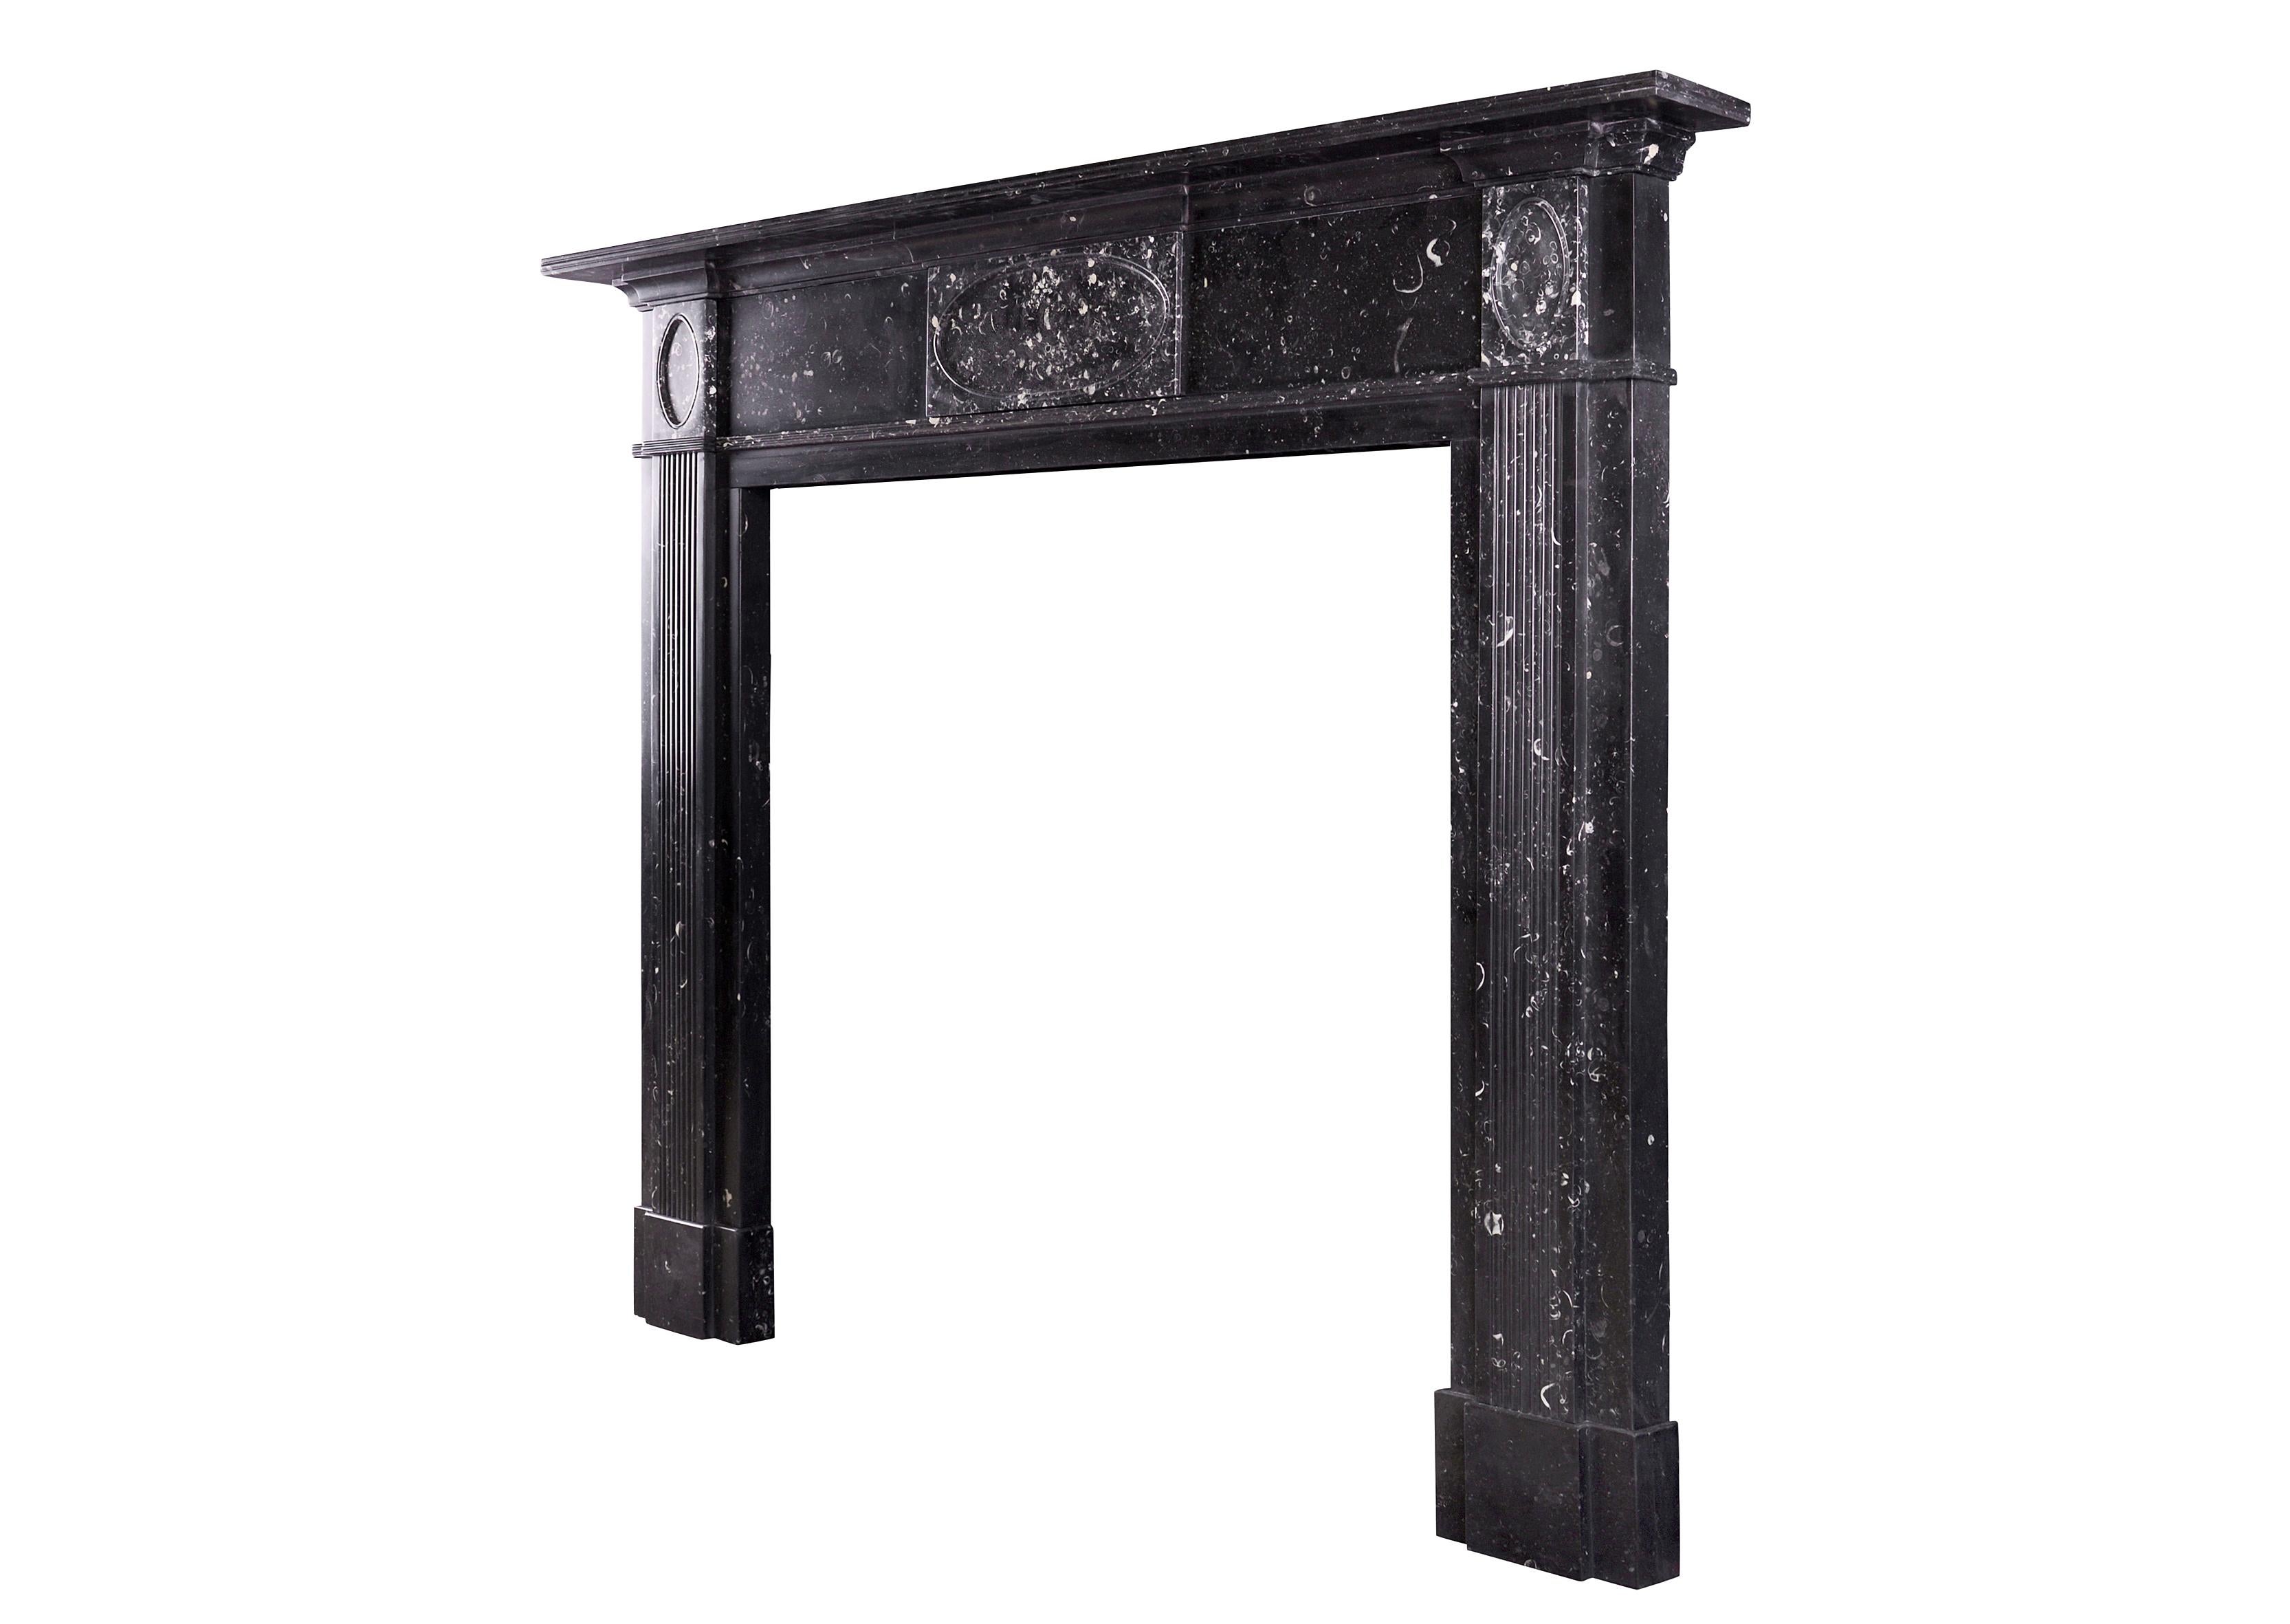 A Scottish Regency fireplace in black Kilkenny marble. The reeded jambs surmounted by plain frieze featuring oval centre and side blockings. Reeded detail to shelf. Early 19th century, circa 1810.

Shelf Width:	1704 mm      	67 ⅛